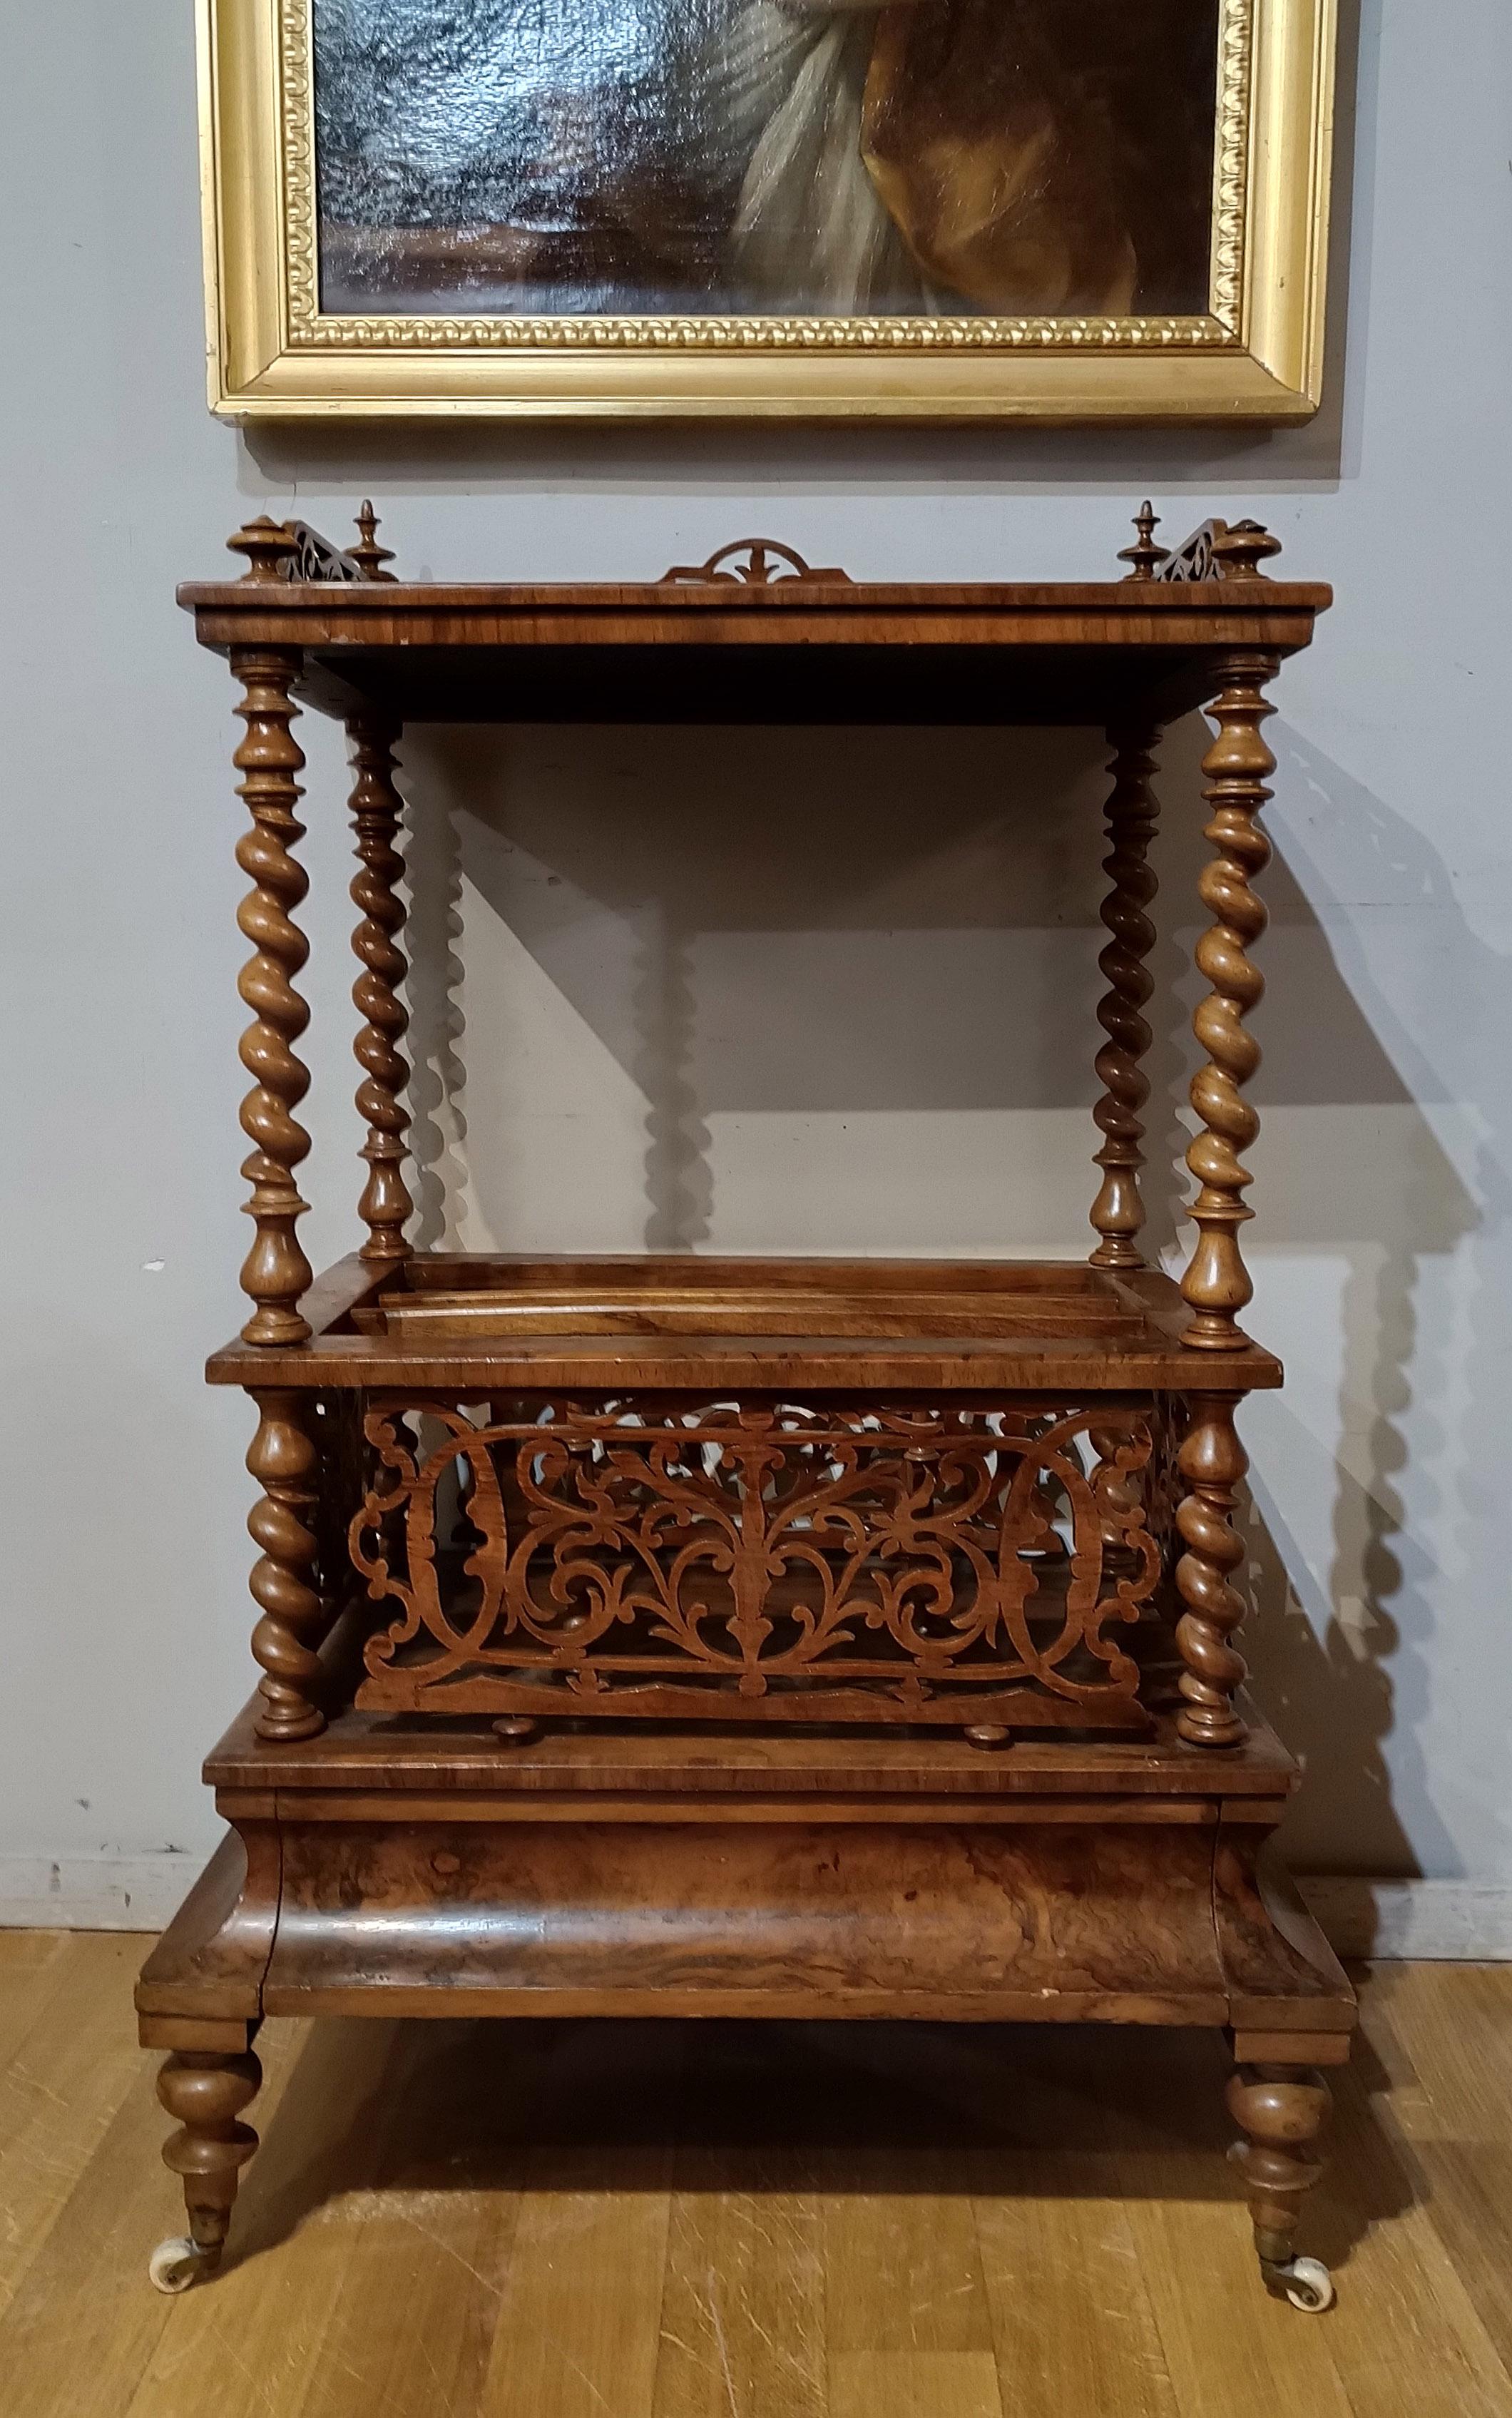 This magazine rack is a unique piece, characterized by its elegance and refinement. Made entirely of fine briar and solid walnut, it is a piece of furniture that reflects the typical English manufacturing of the mid-19th century. The design